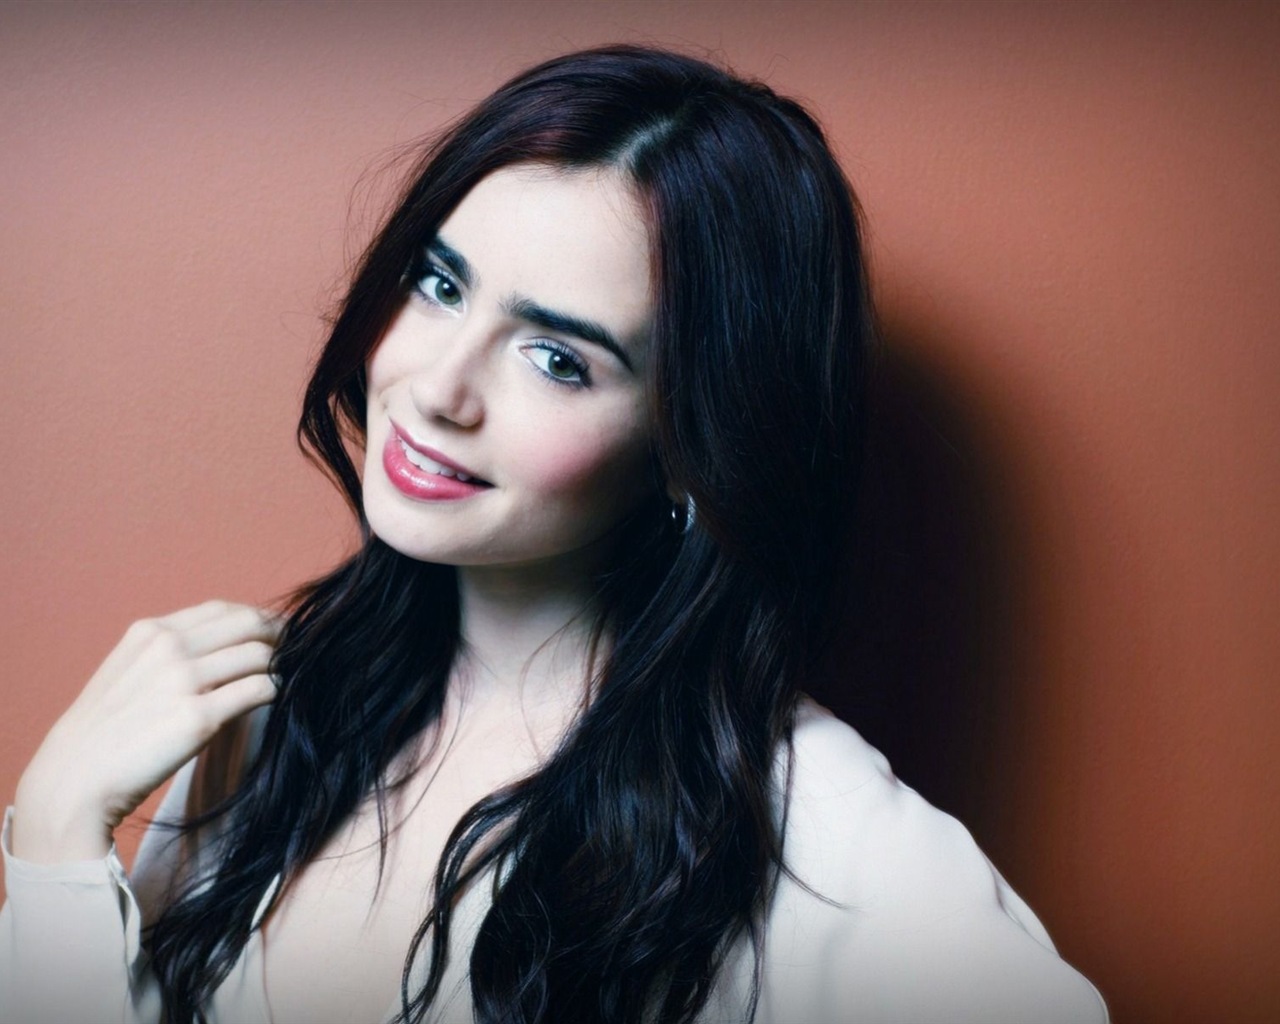 Lily Collins beautiful wallpapers #6 - 1280x1024